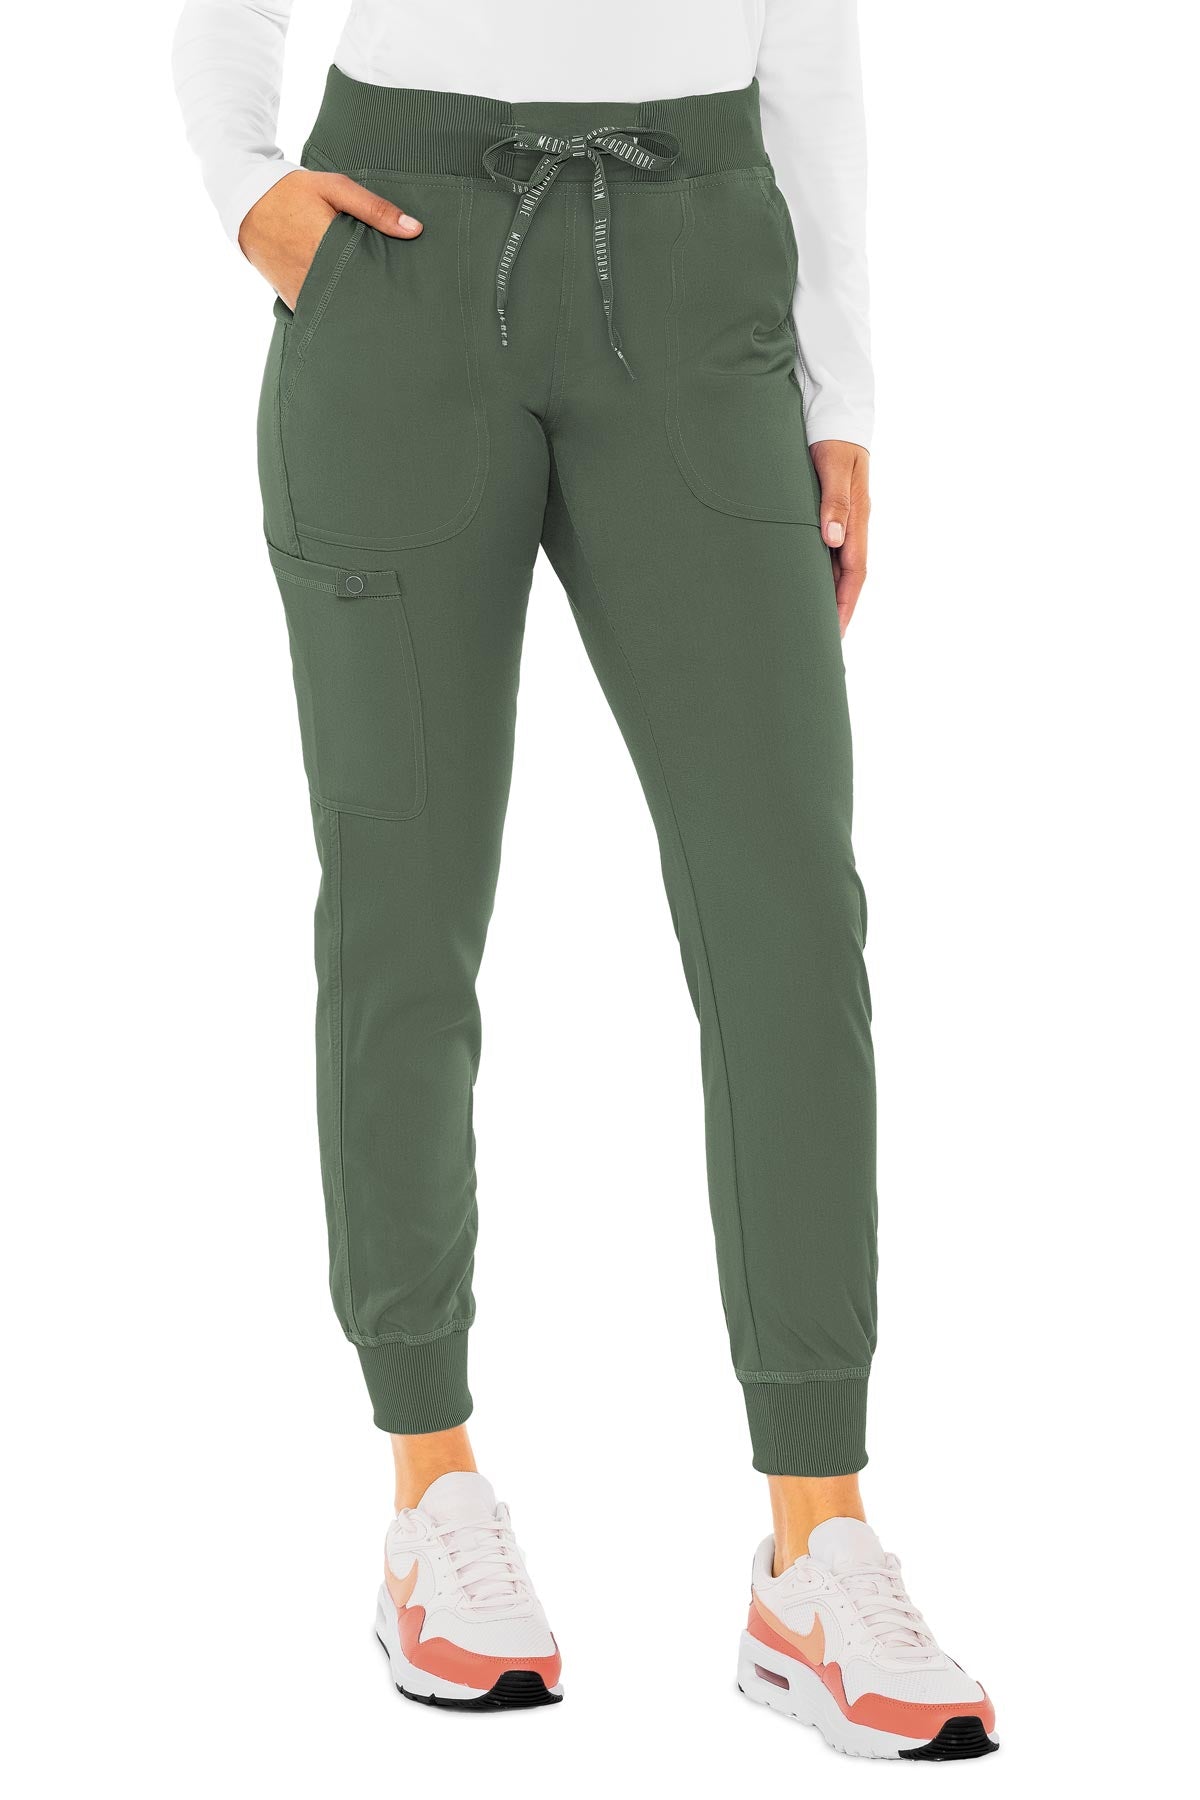 Med Couture Olive PANT